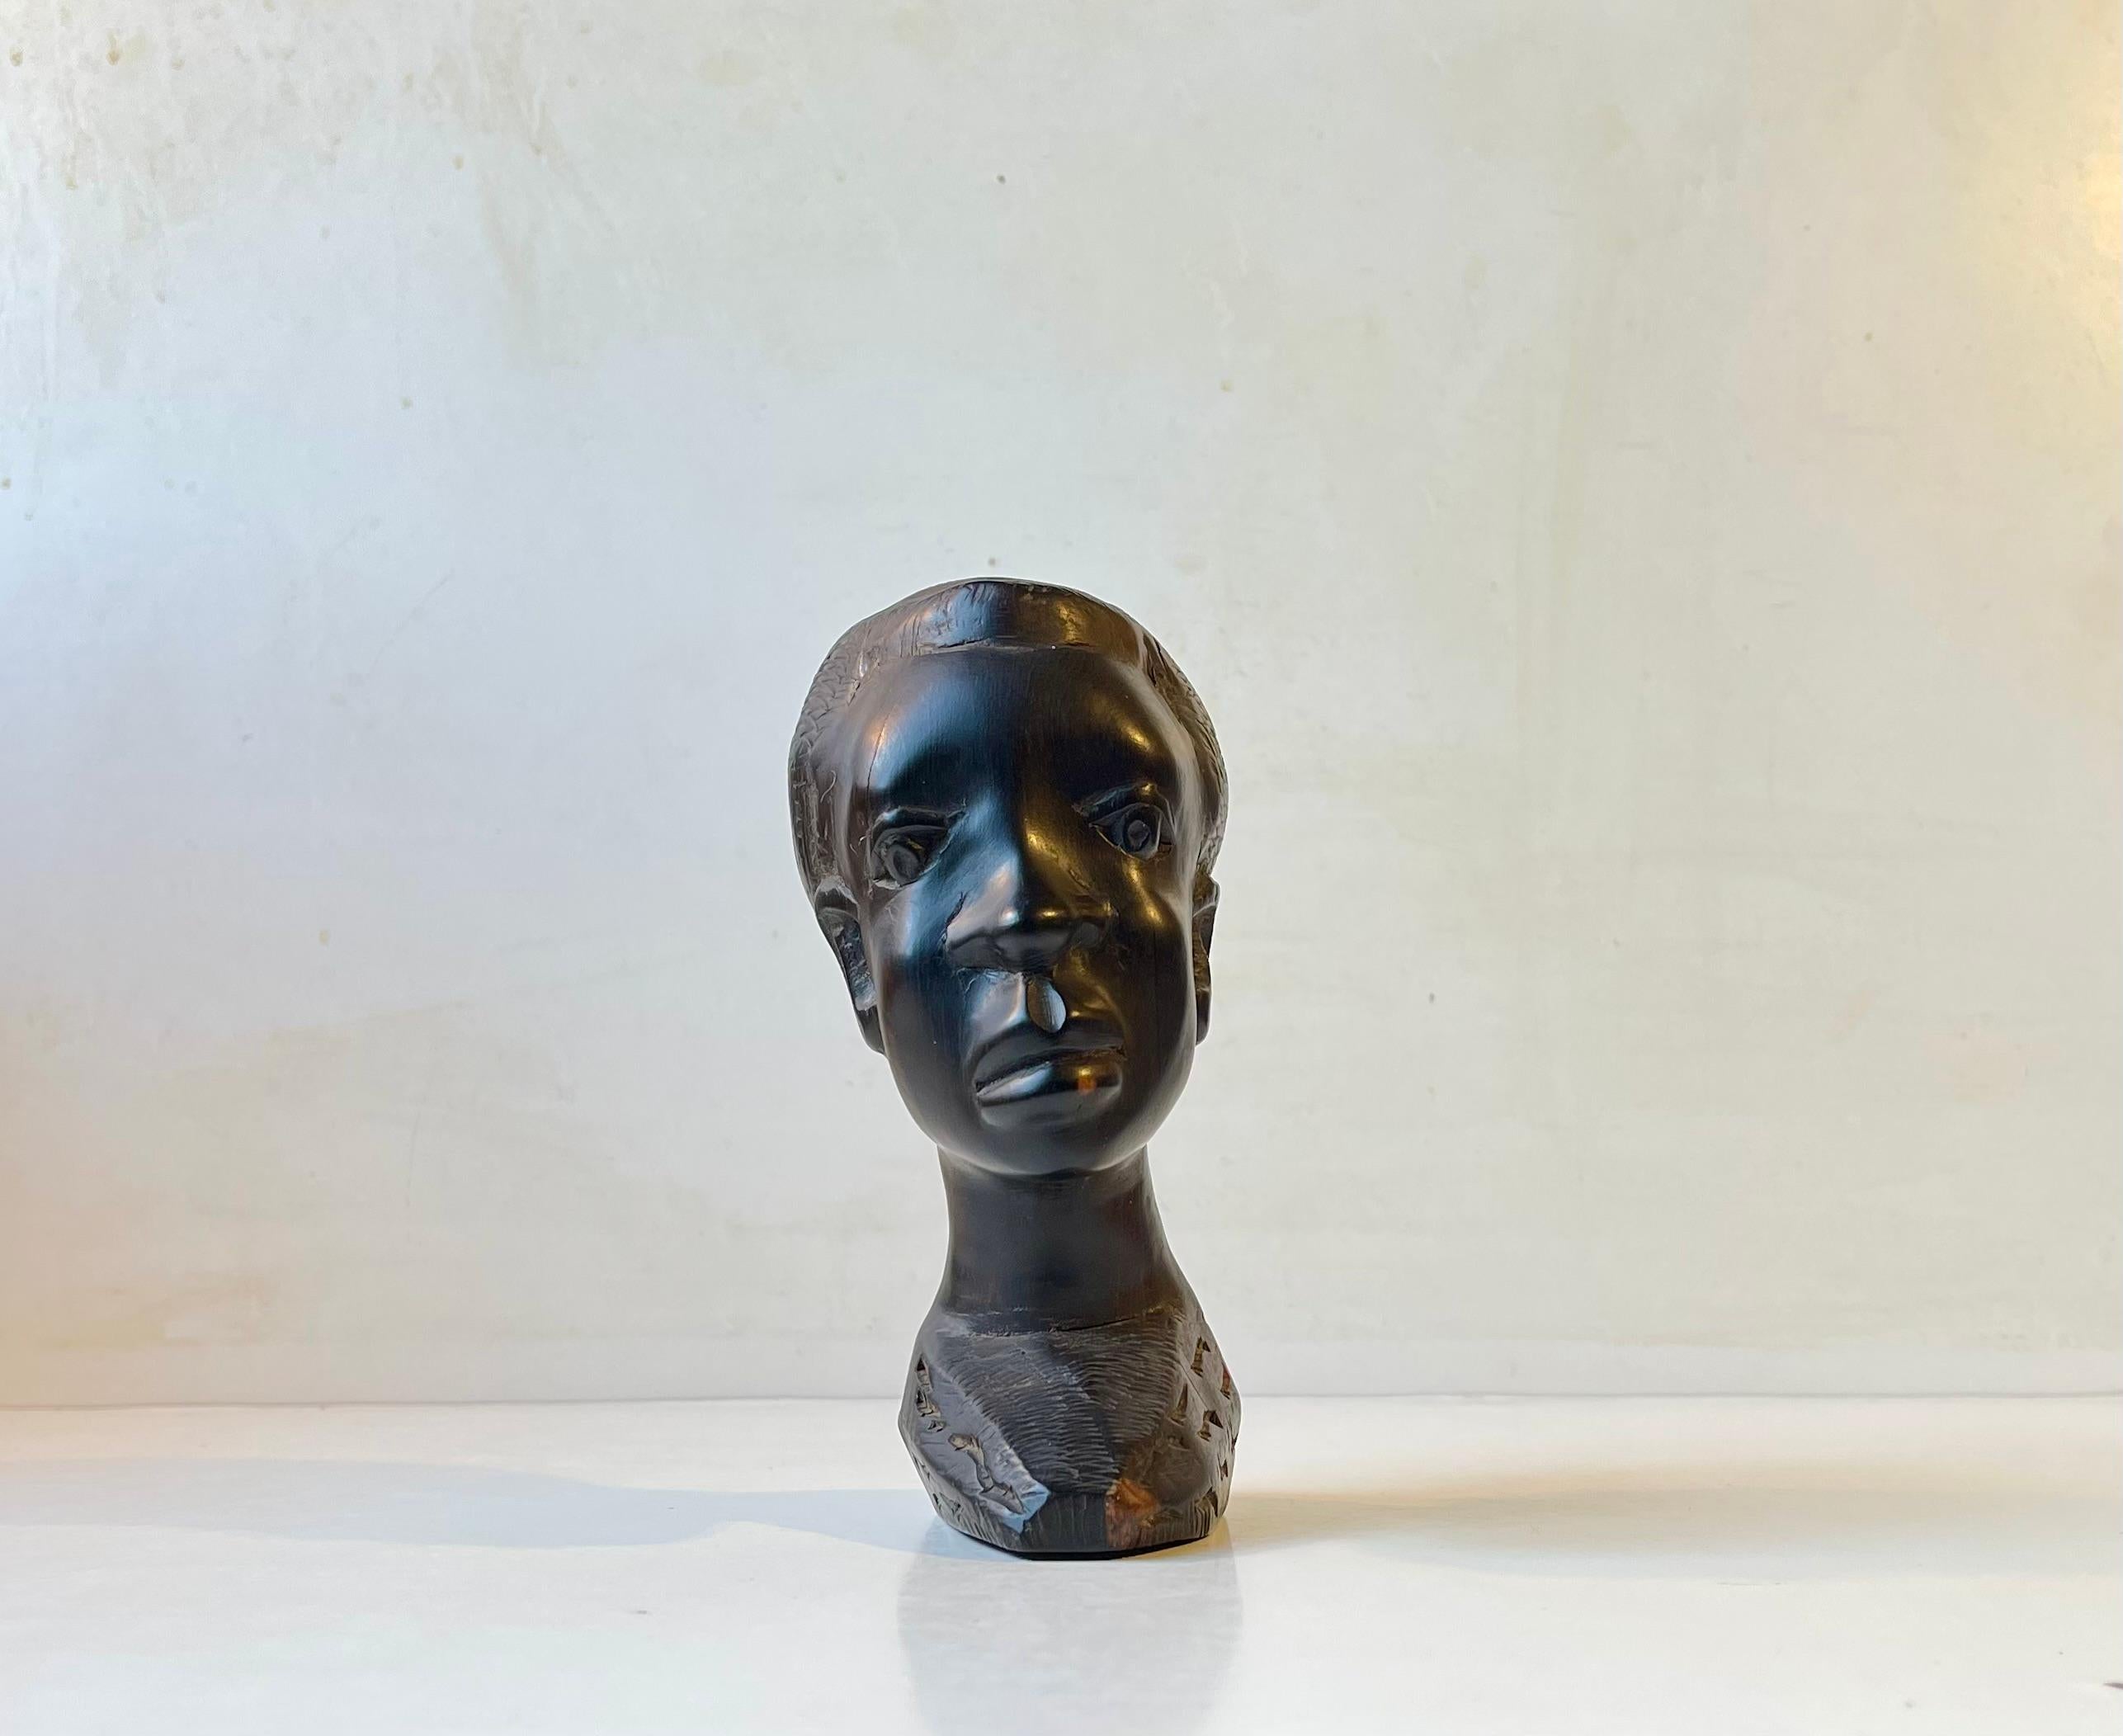 Small scaled african head bust hand carved in black wood. It has a slight tilt - leaning to one side. It features fine details and textures. Particularly its cheekbones and hair. It was made in Africa at the latest during the 1960s where it was